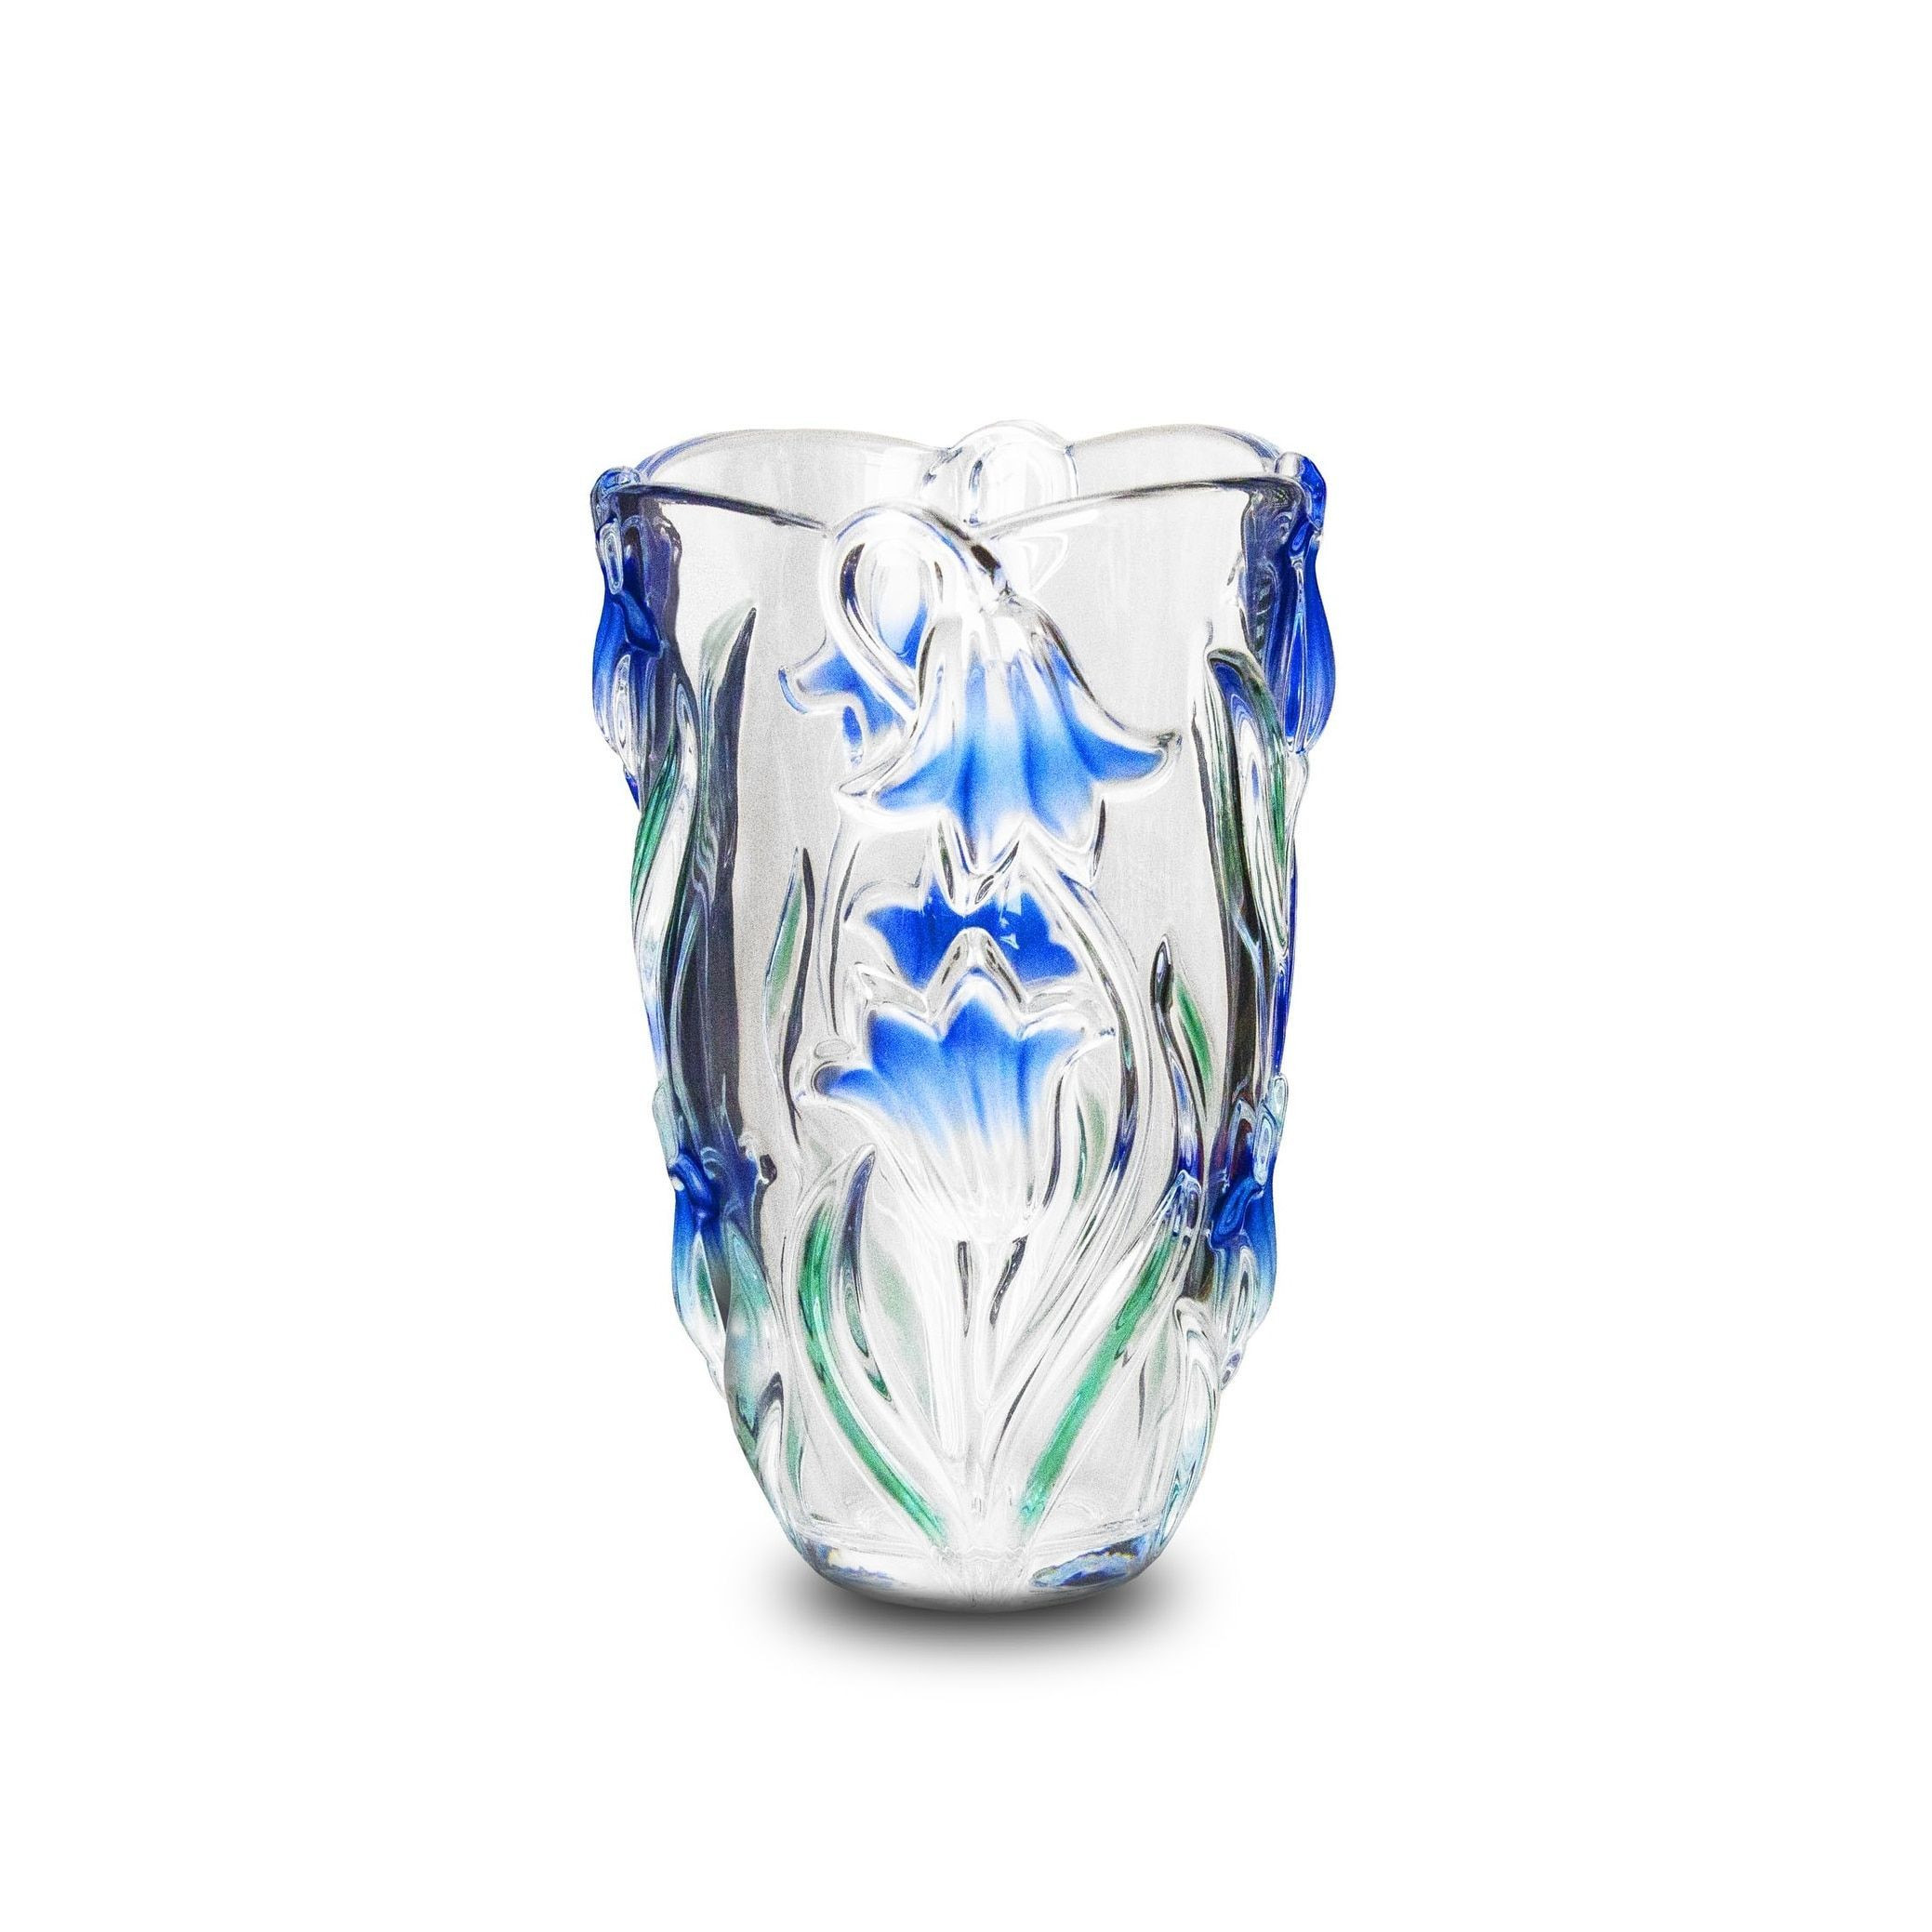 15 Cute Antique Lenox Vases 2024 free download antique lenox vases of 21 crystal glass vase the weekly world throughout studio silversmiths blue danube collection crystal vase